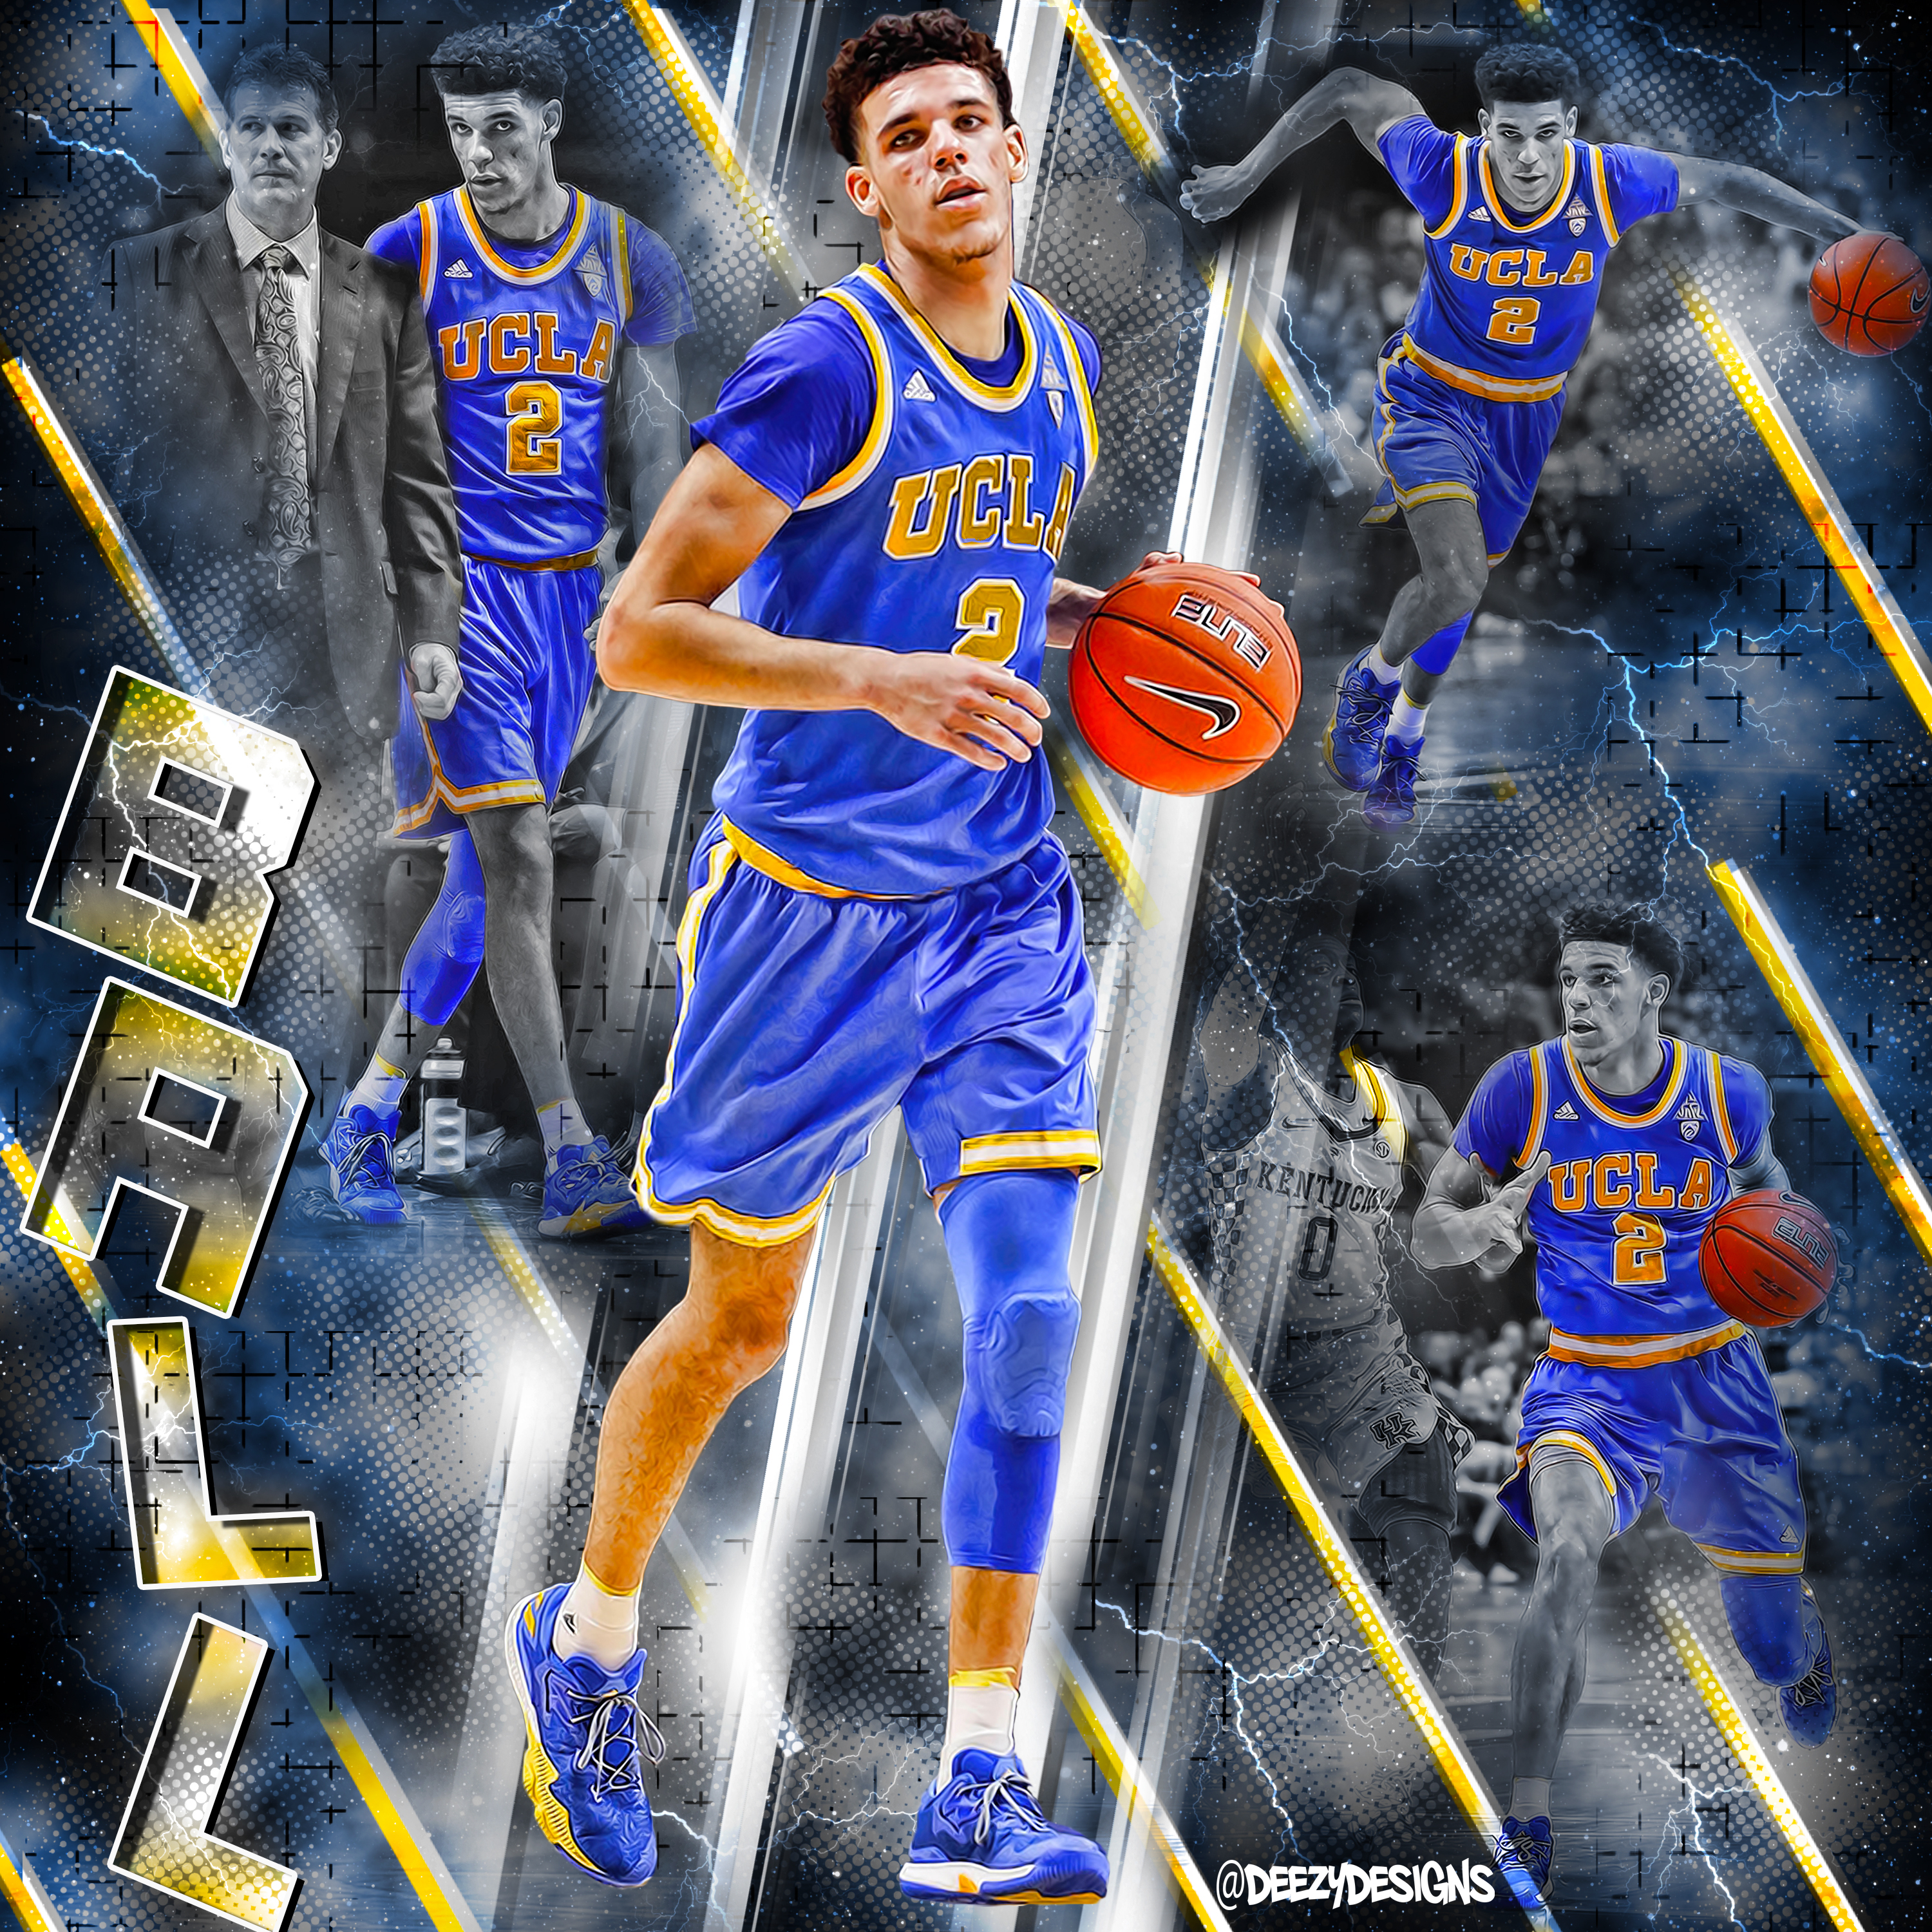 Image result for lonzo ball deezydesigns